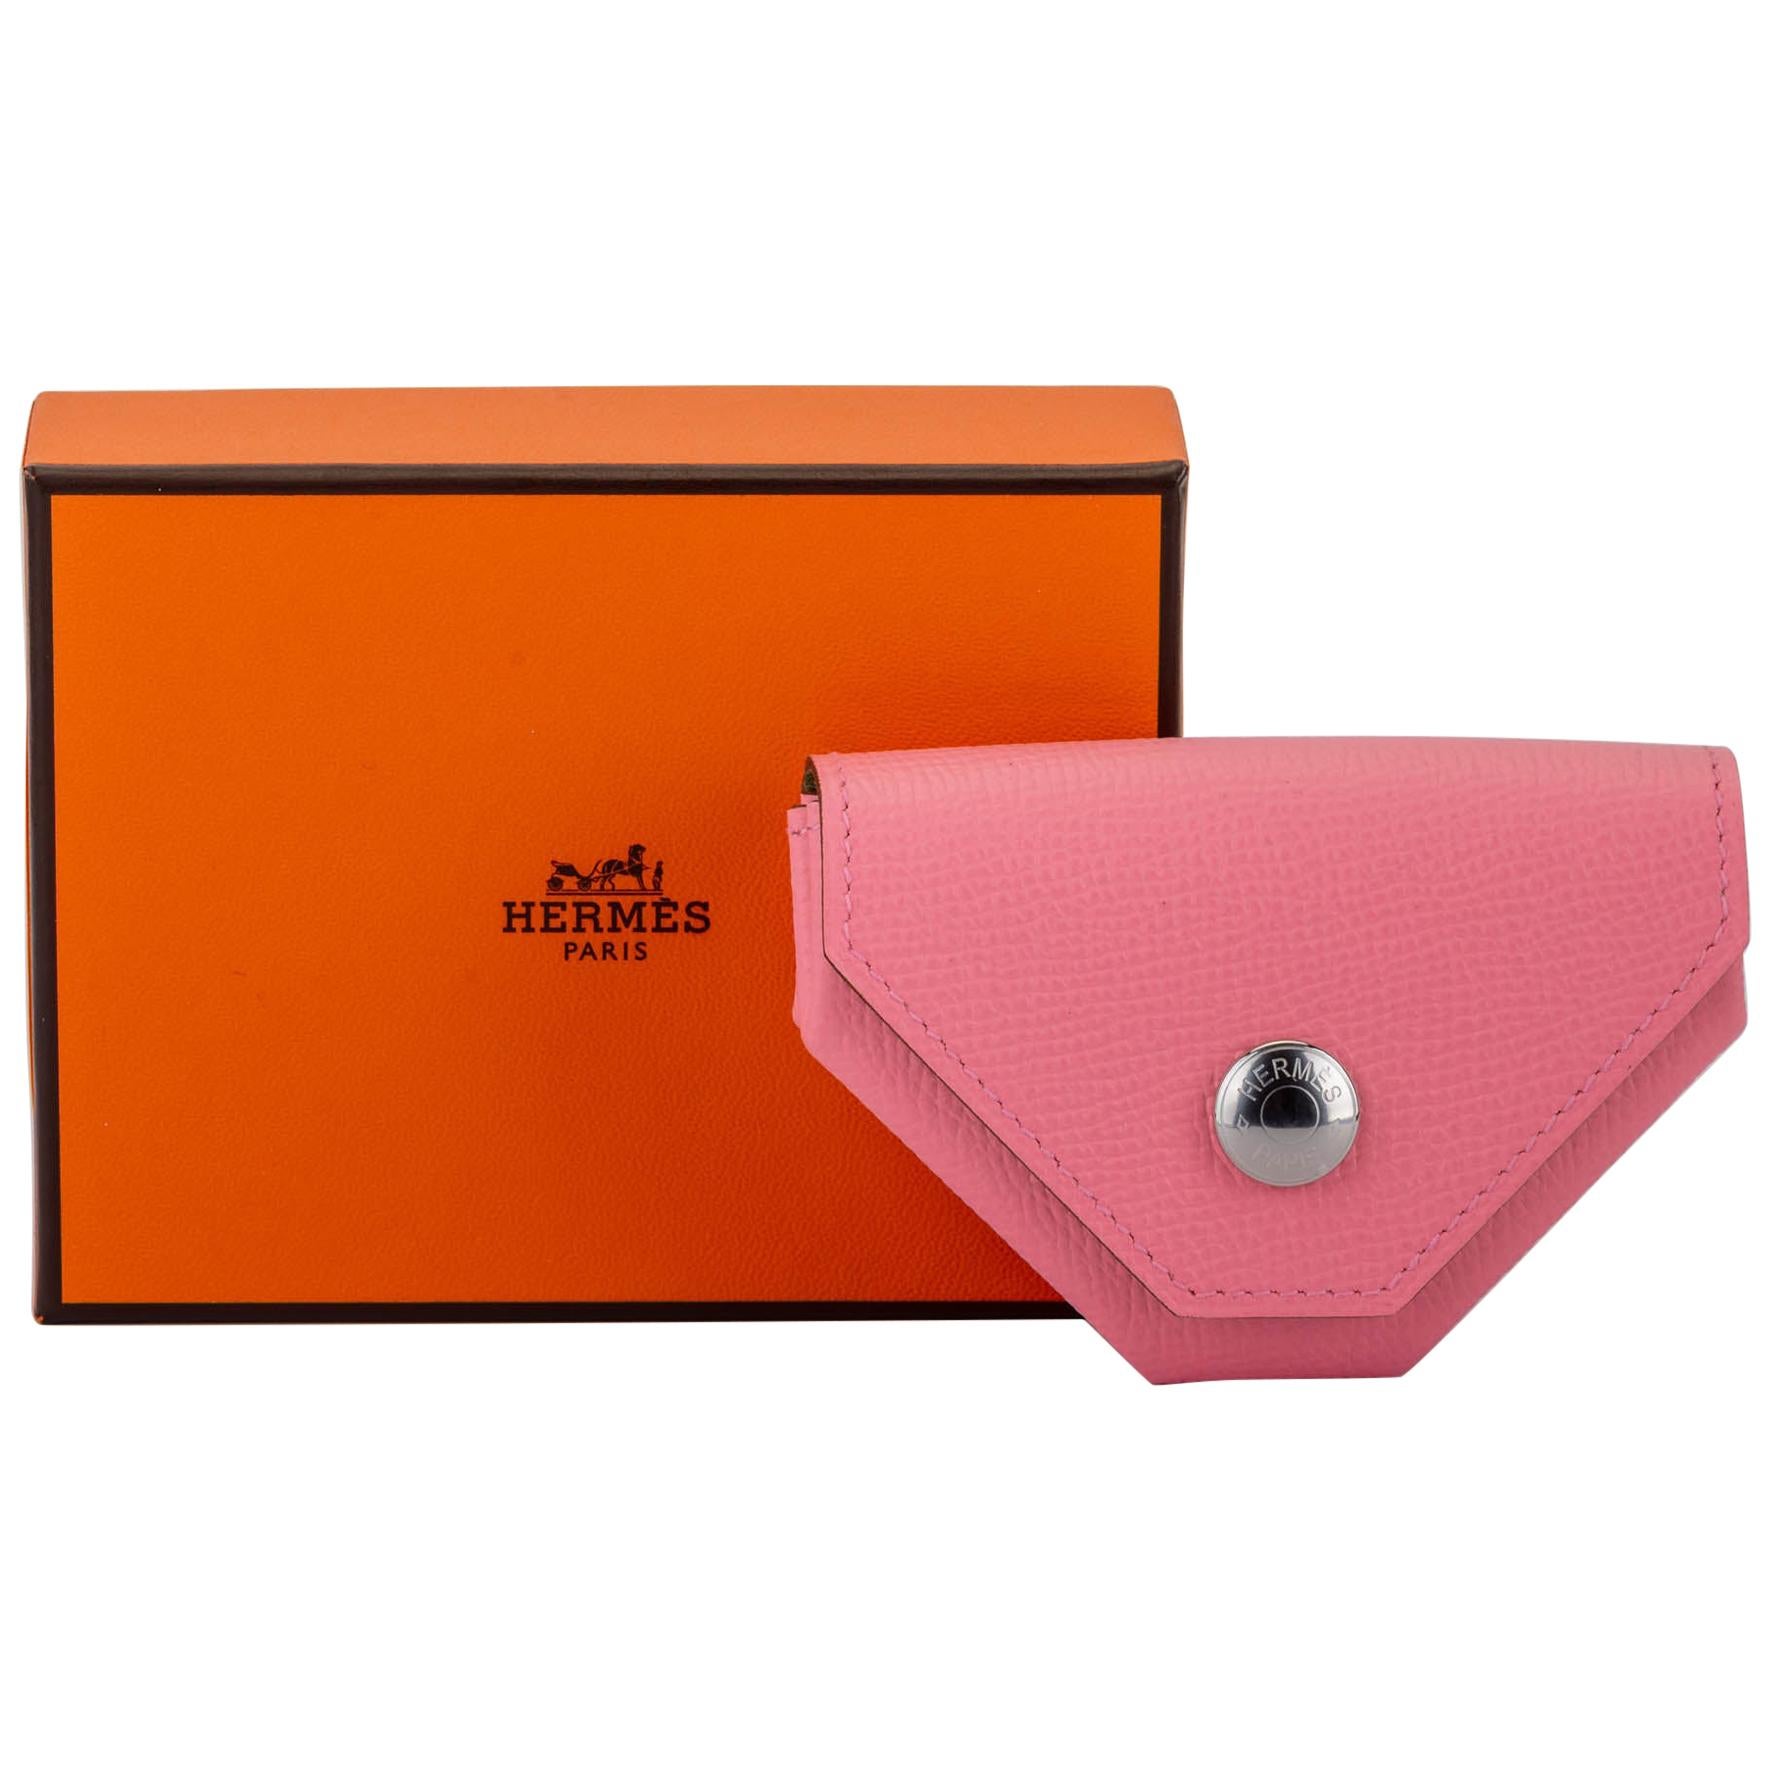 New in Box Hermes Verso Pink Greean Coin Case